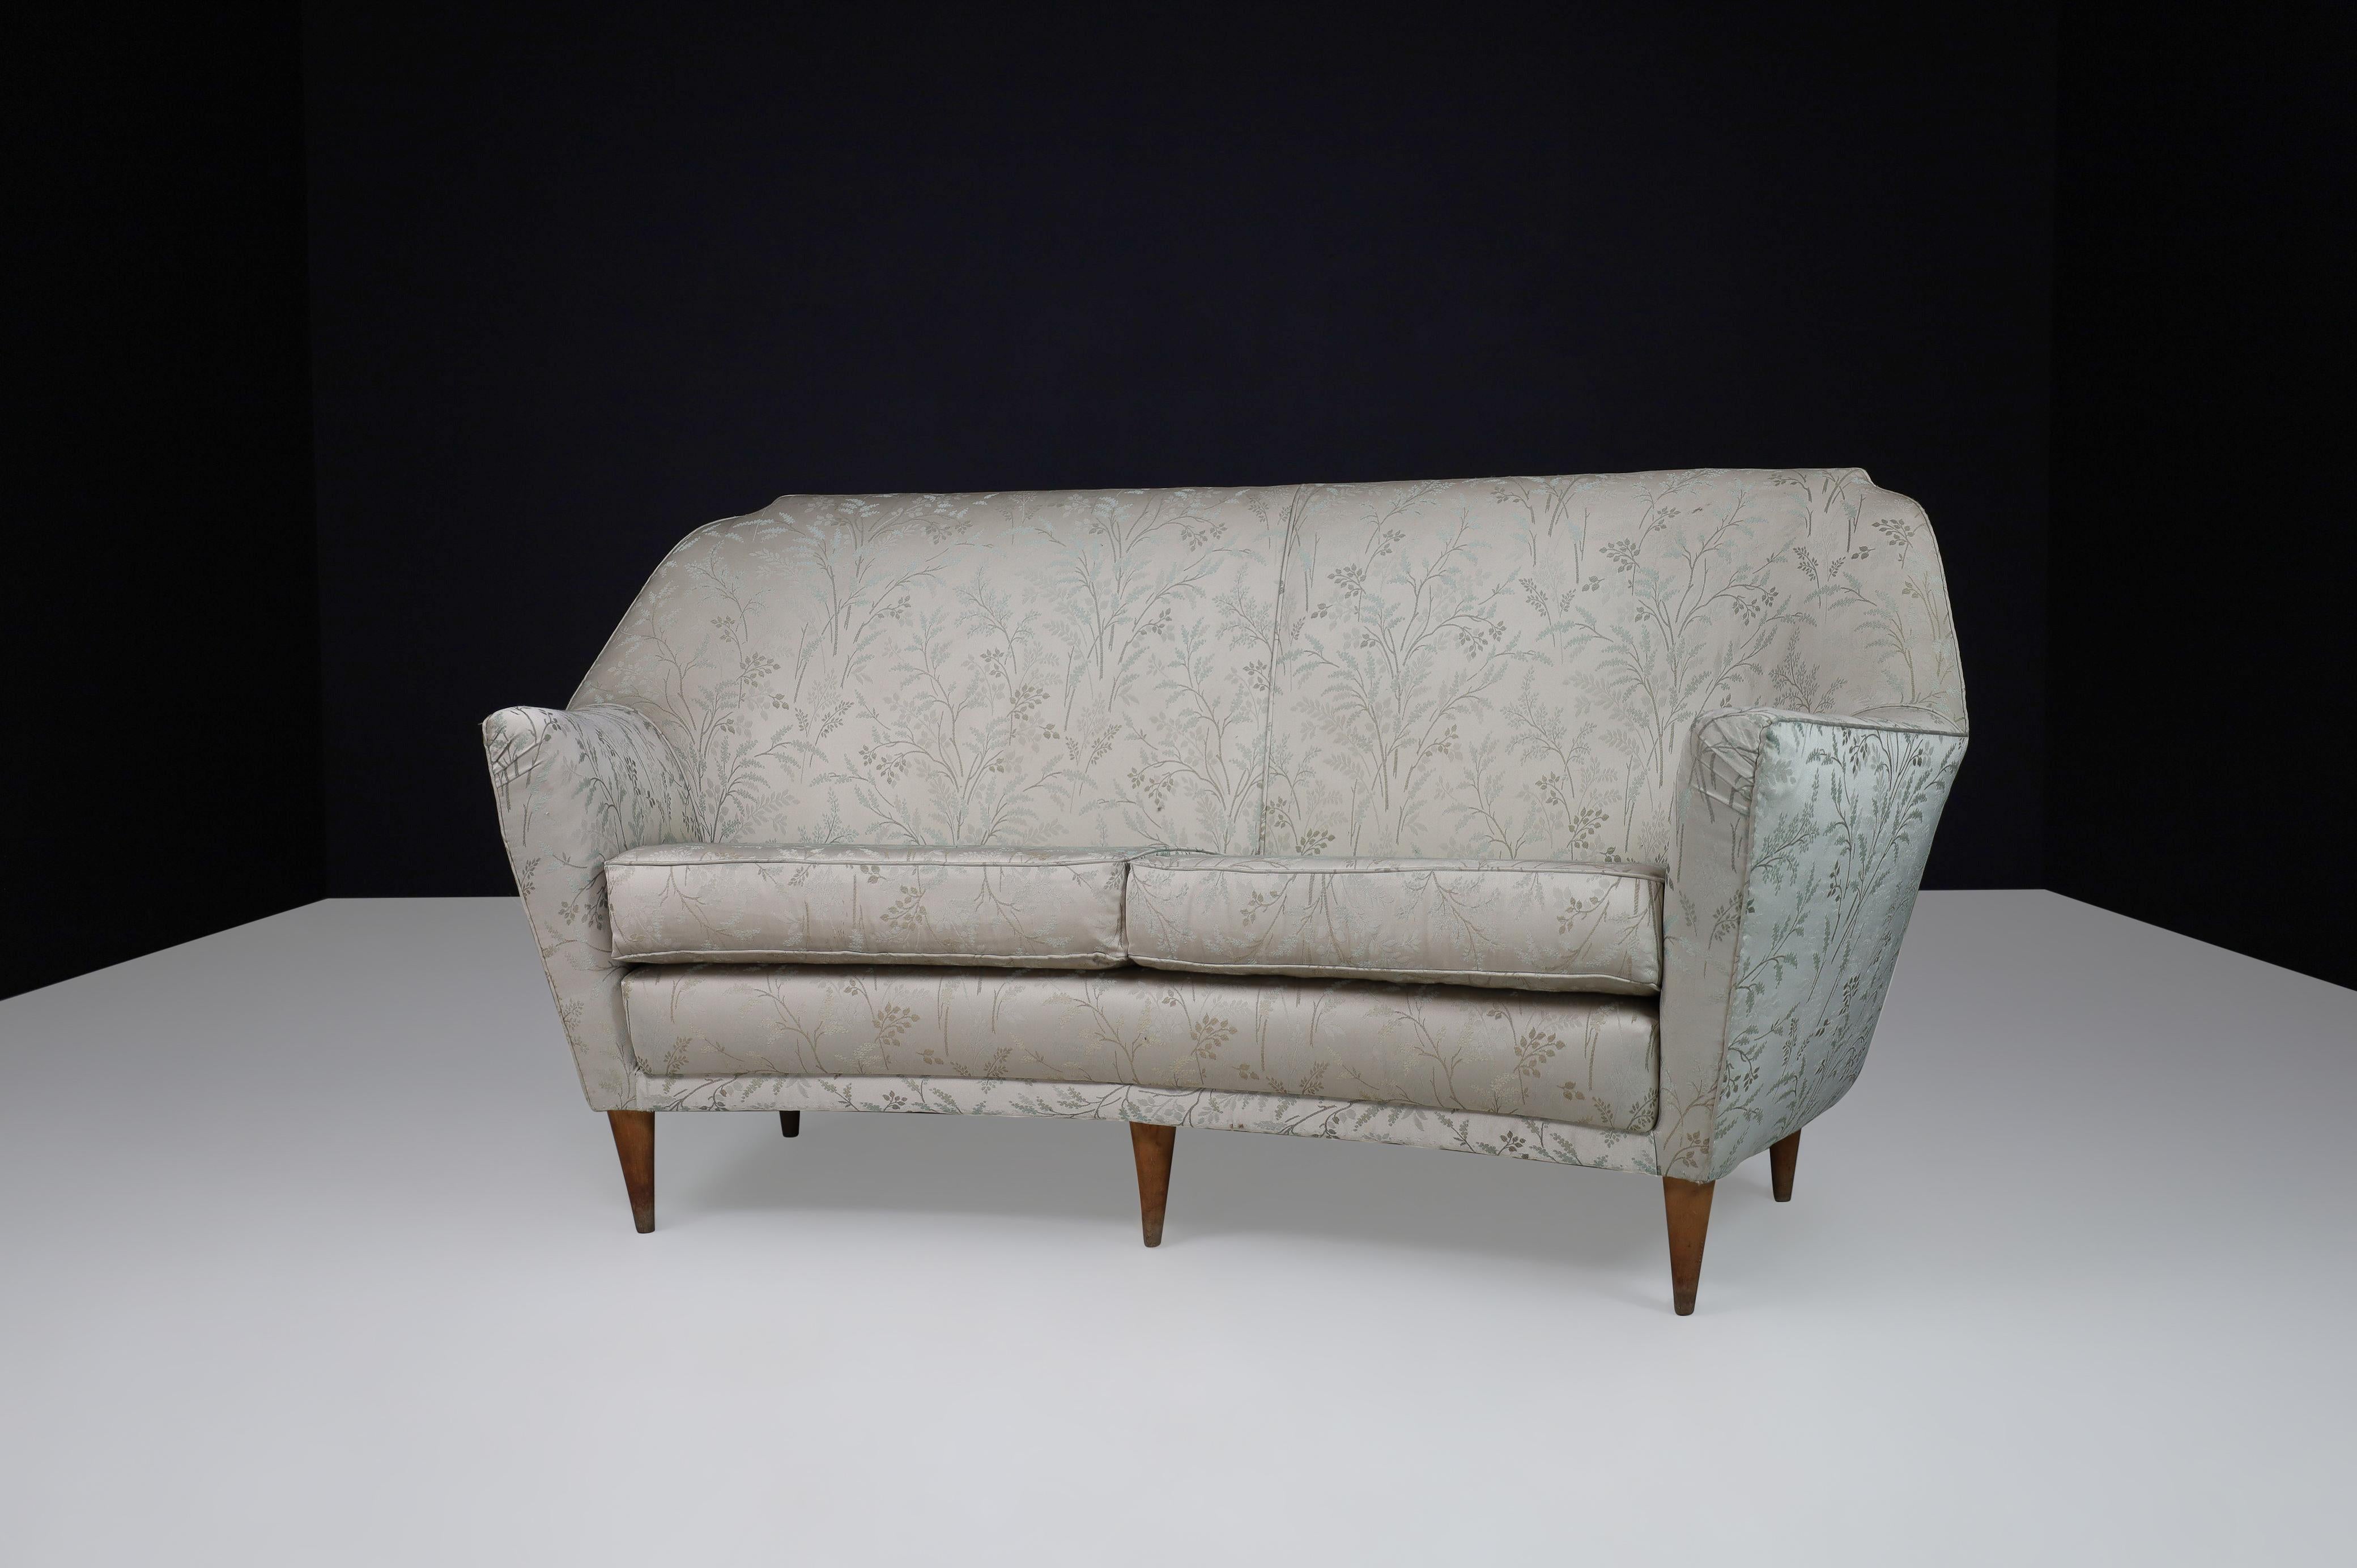 Italian Ico Parisi Sofa in Leaf Motif Fabric and Tapered Wooden Legs, Italy, 1950s For Sale